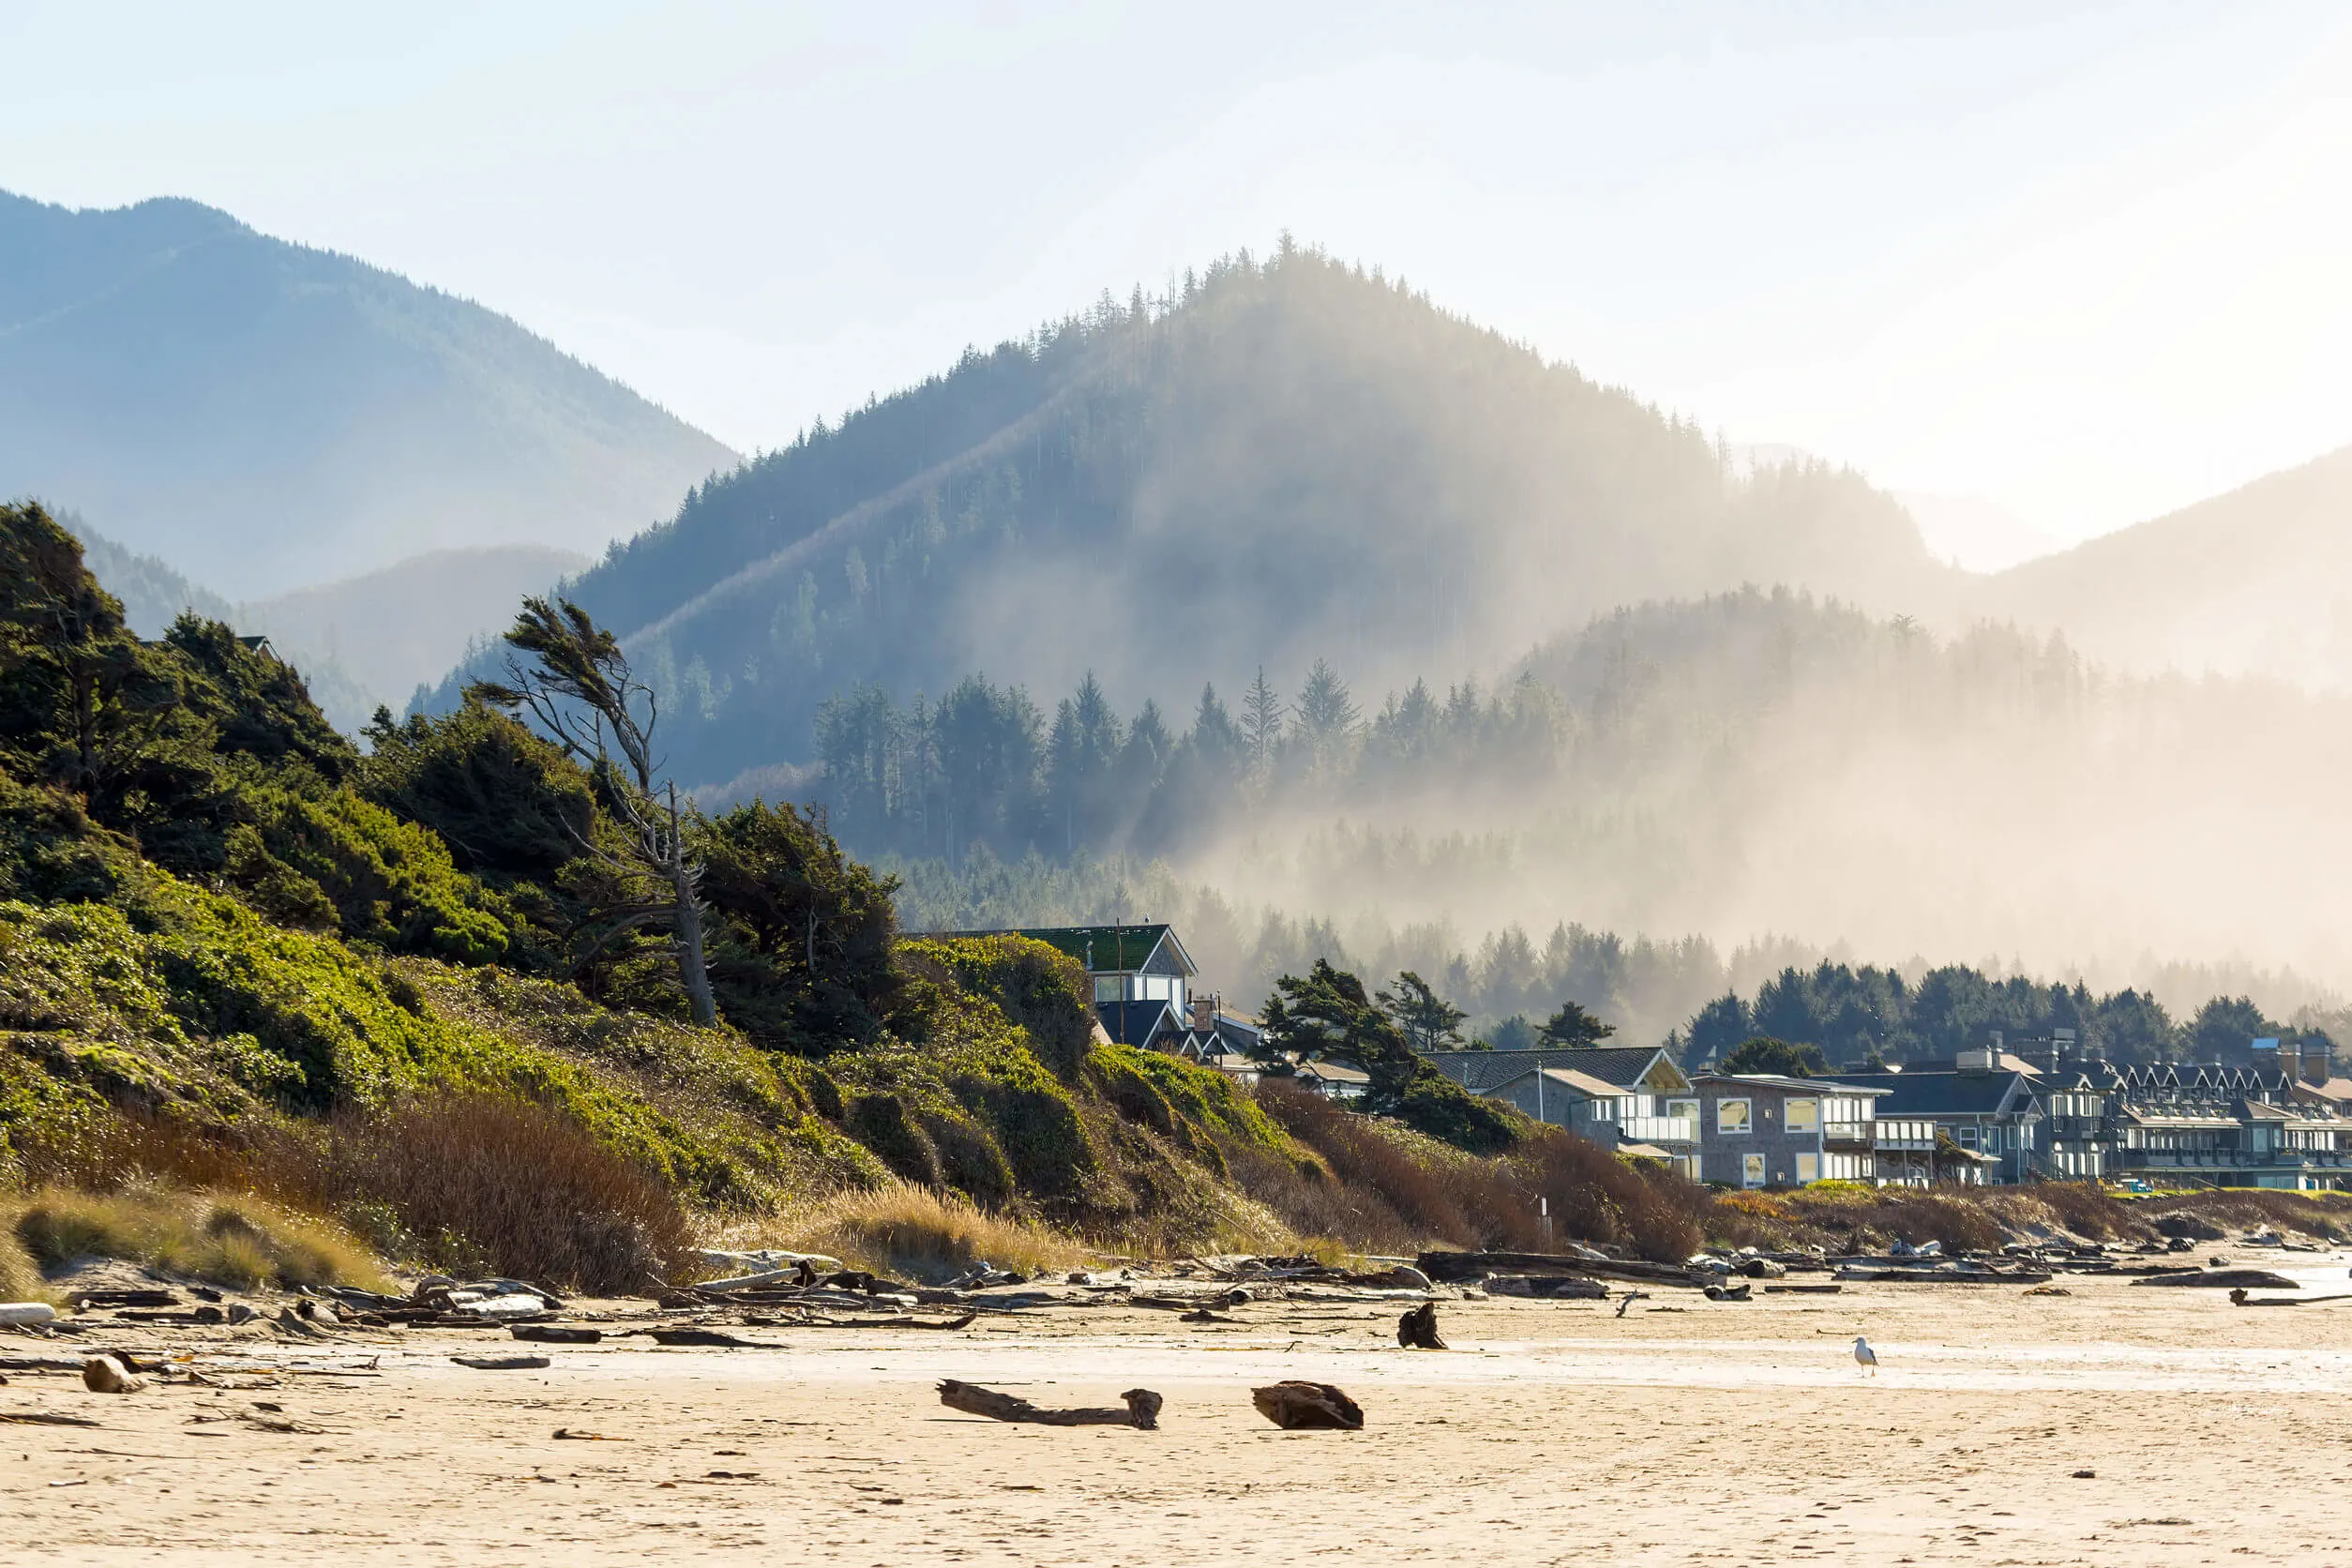 Oceanfront vacation homes along Cannon Beach Oregon Coast by Pacific Ocean